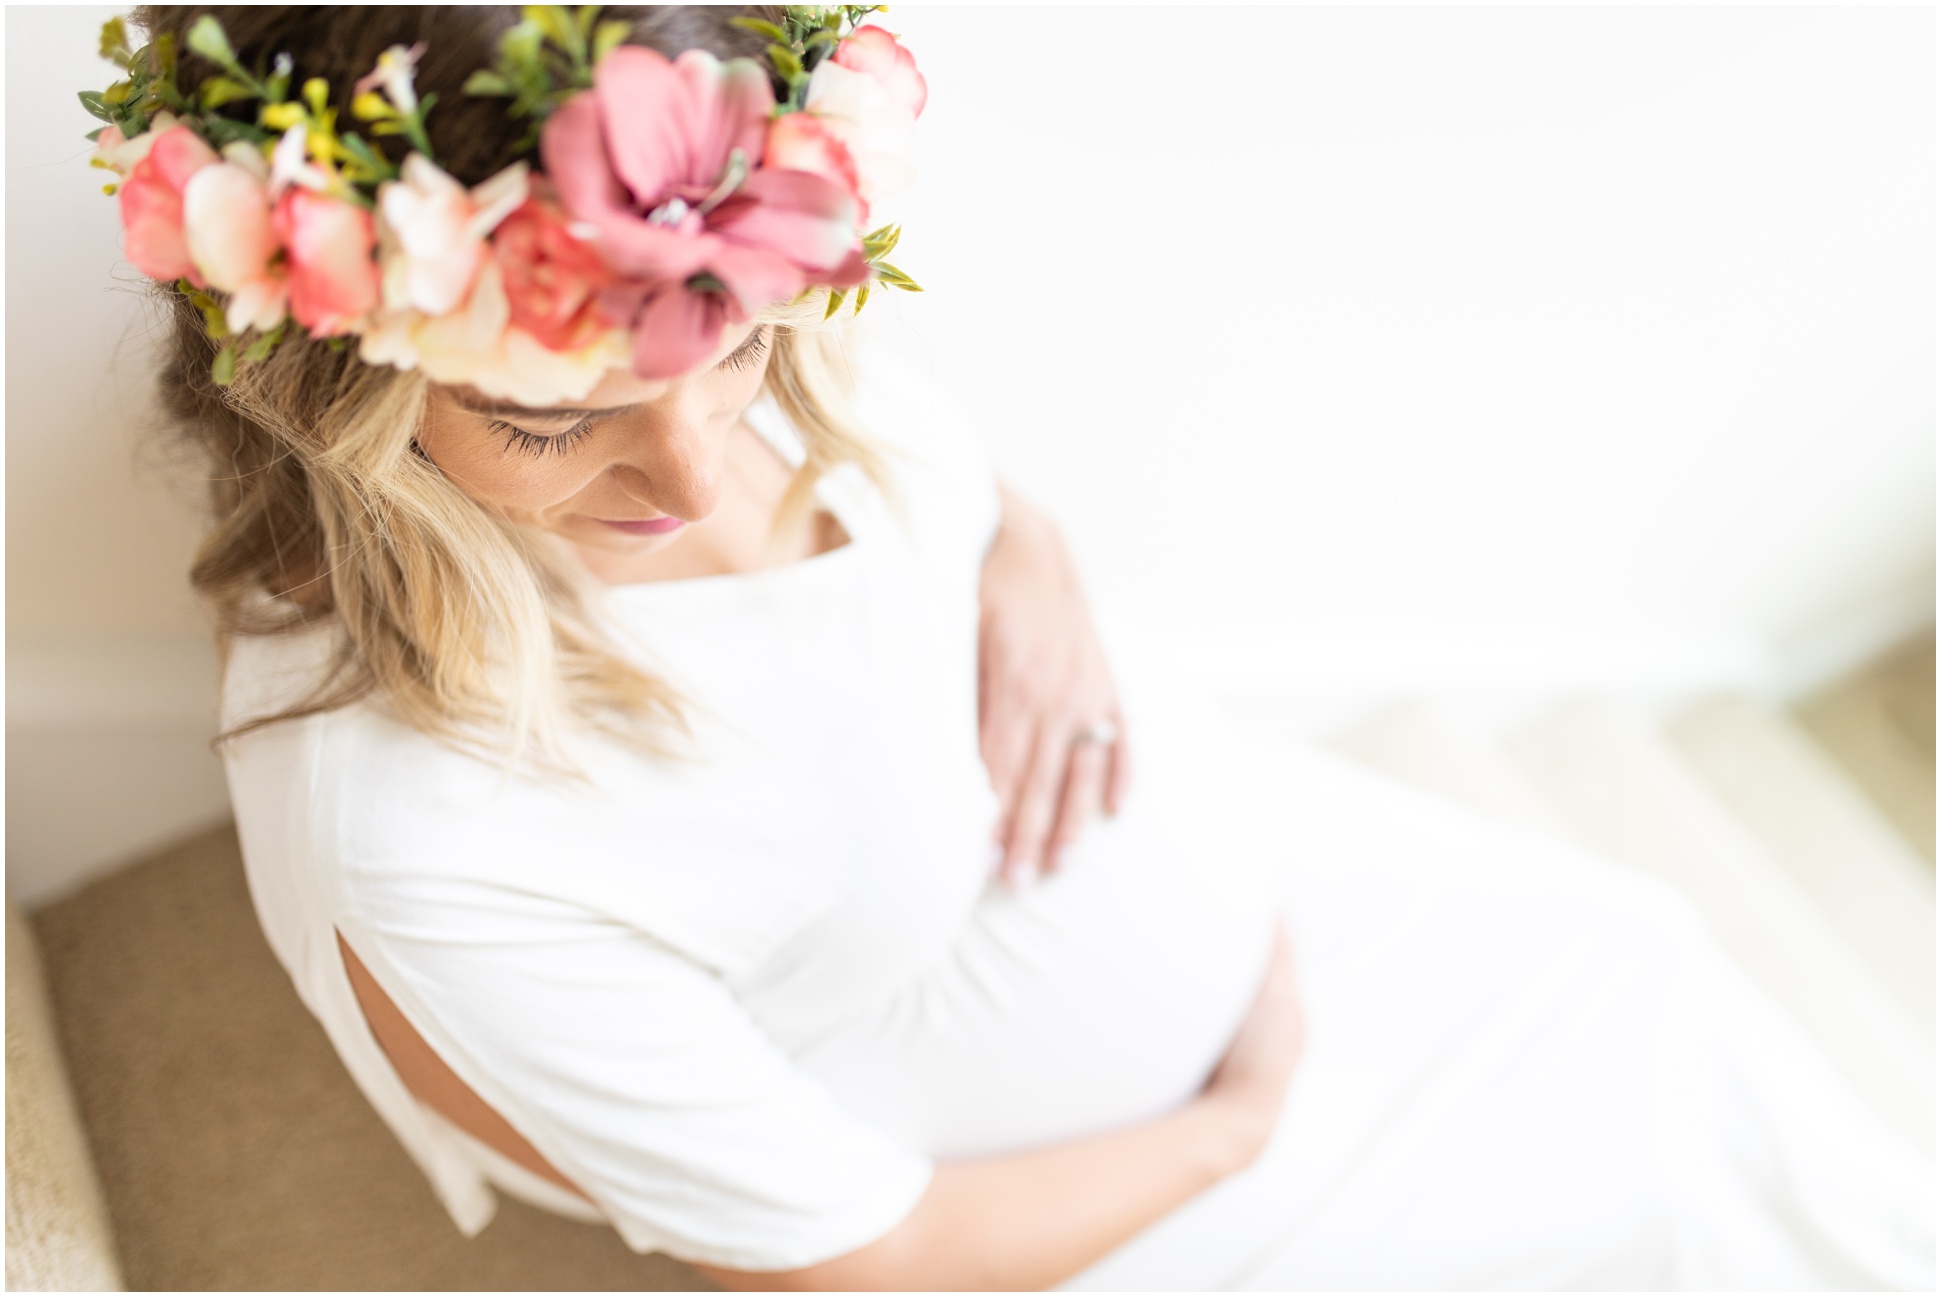 Maternity Shot focused on baby bump with white dress